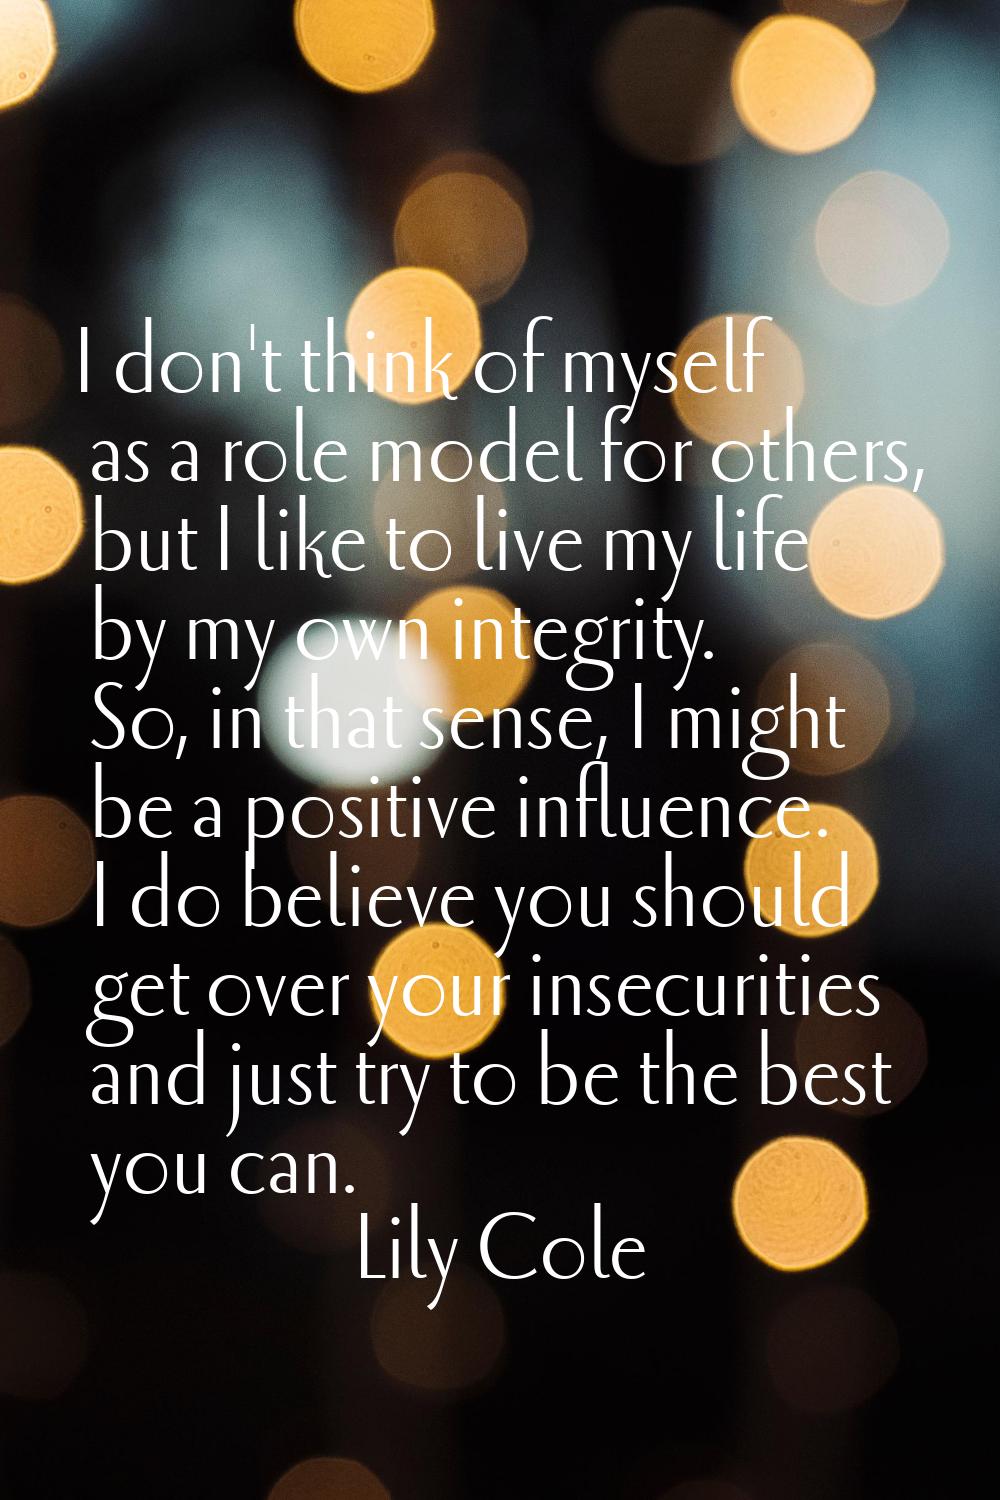 I don't think of myself as a role model for others, but I like to live my life by my own integrity.